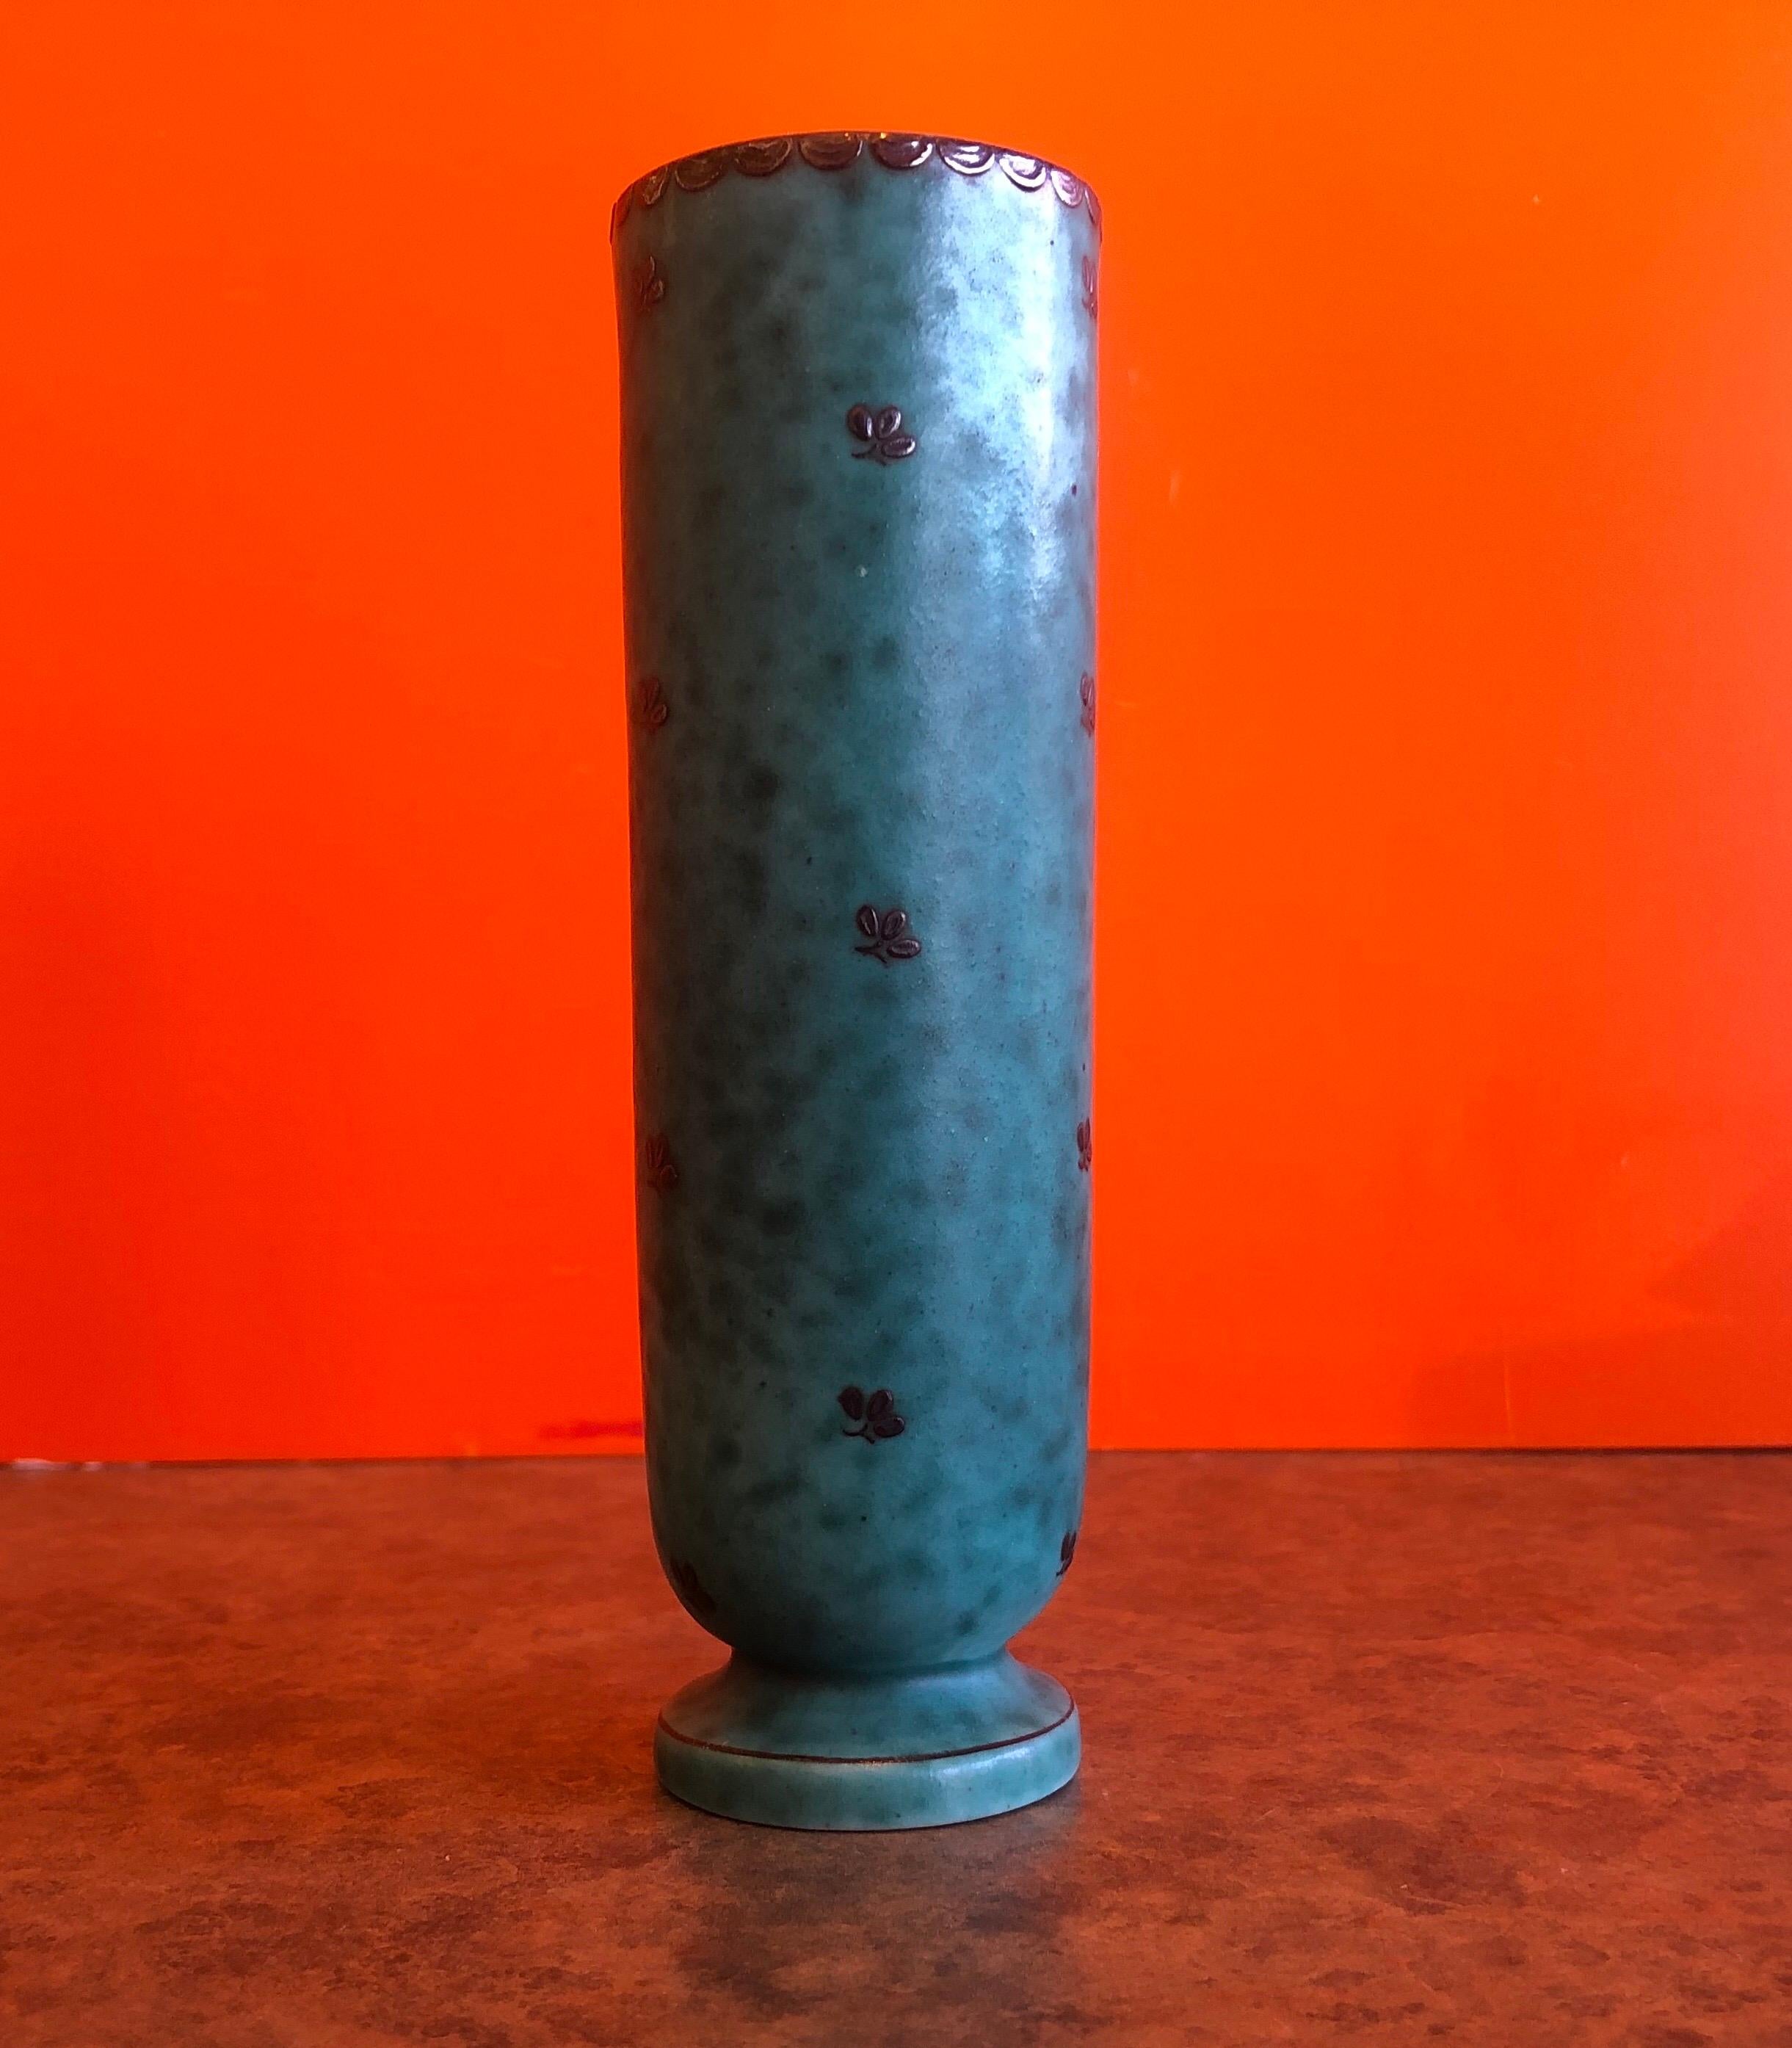 Beautiful ceramic Art Deco bud vase by Wilhelm Kage for Argenta, circa 1940s.

The vase has a green ceramic finish with a silver flower motif overlaid.

This vase is in excellent used condition with no chips or cracks and measures 1.75